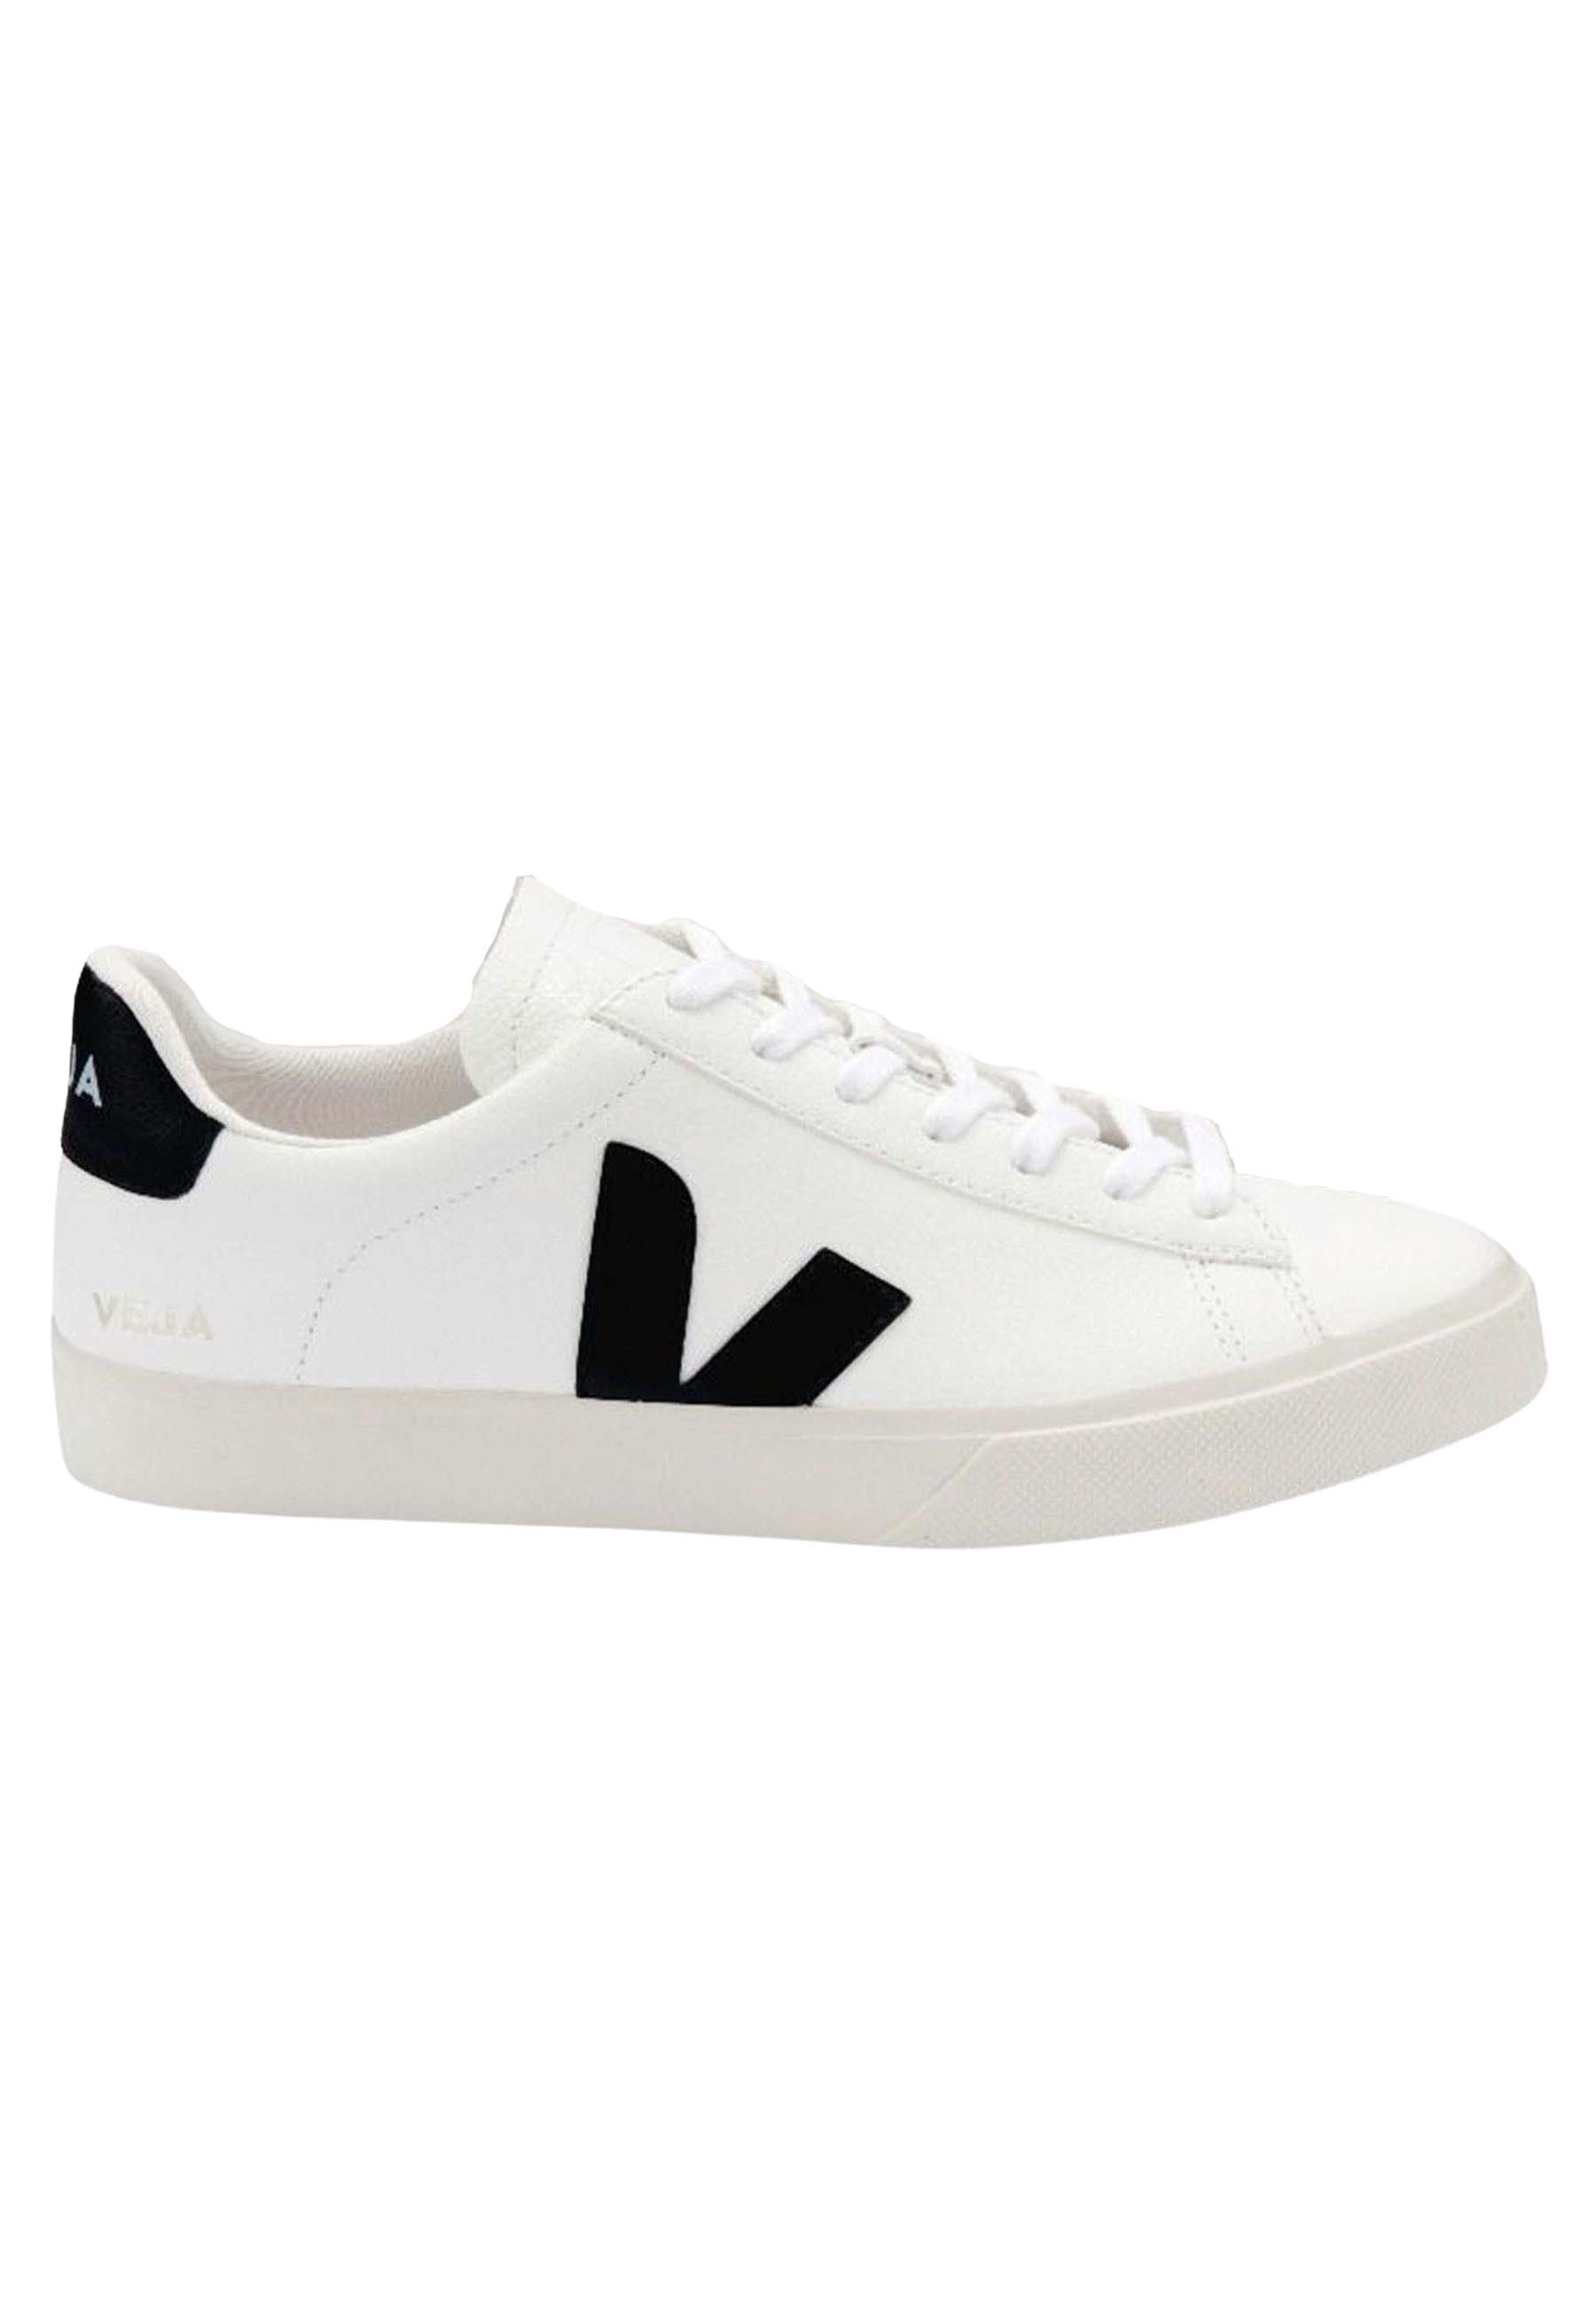 VEJA Campo Chromefree Leather - Dames Sneakers Schoenen Leer Wit CP0501537A - Maat EU 36 US 5